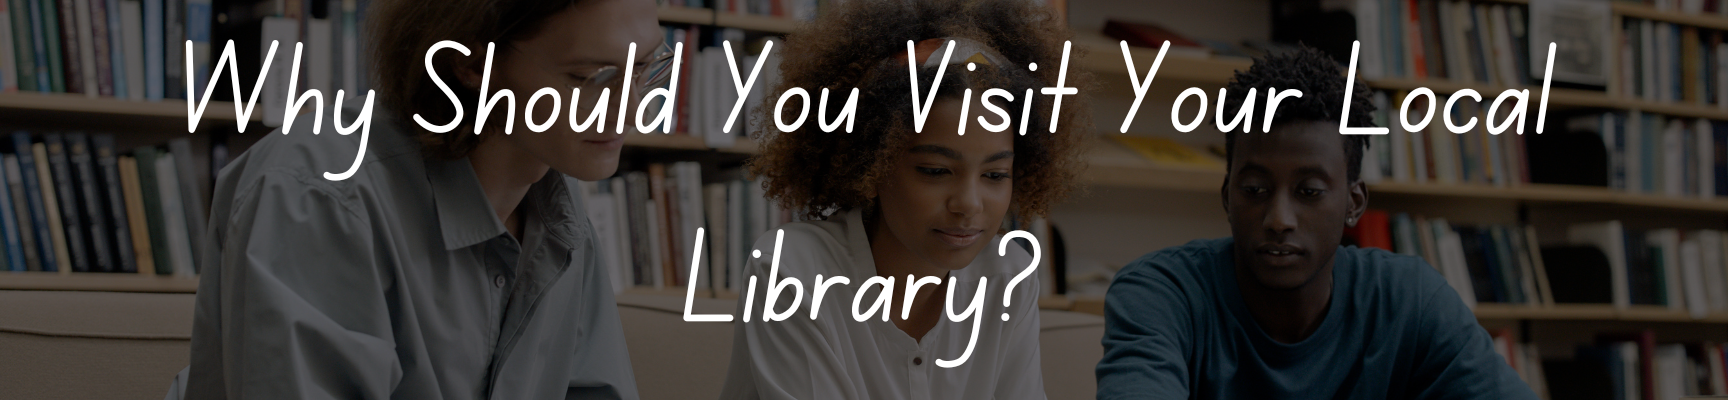 Why Should You Visit Your Local Library